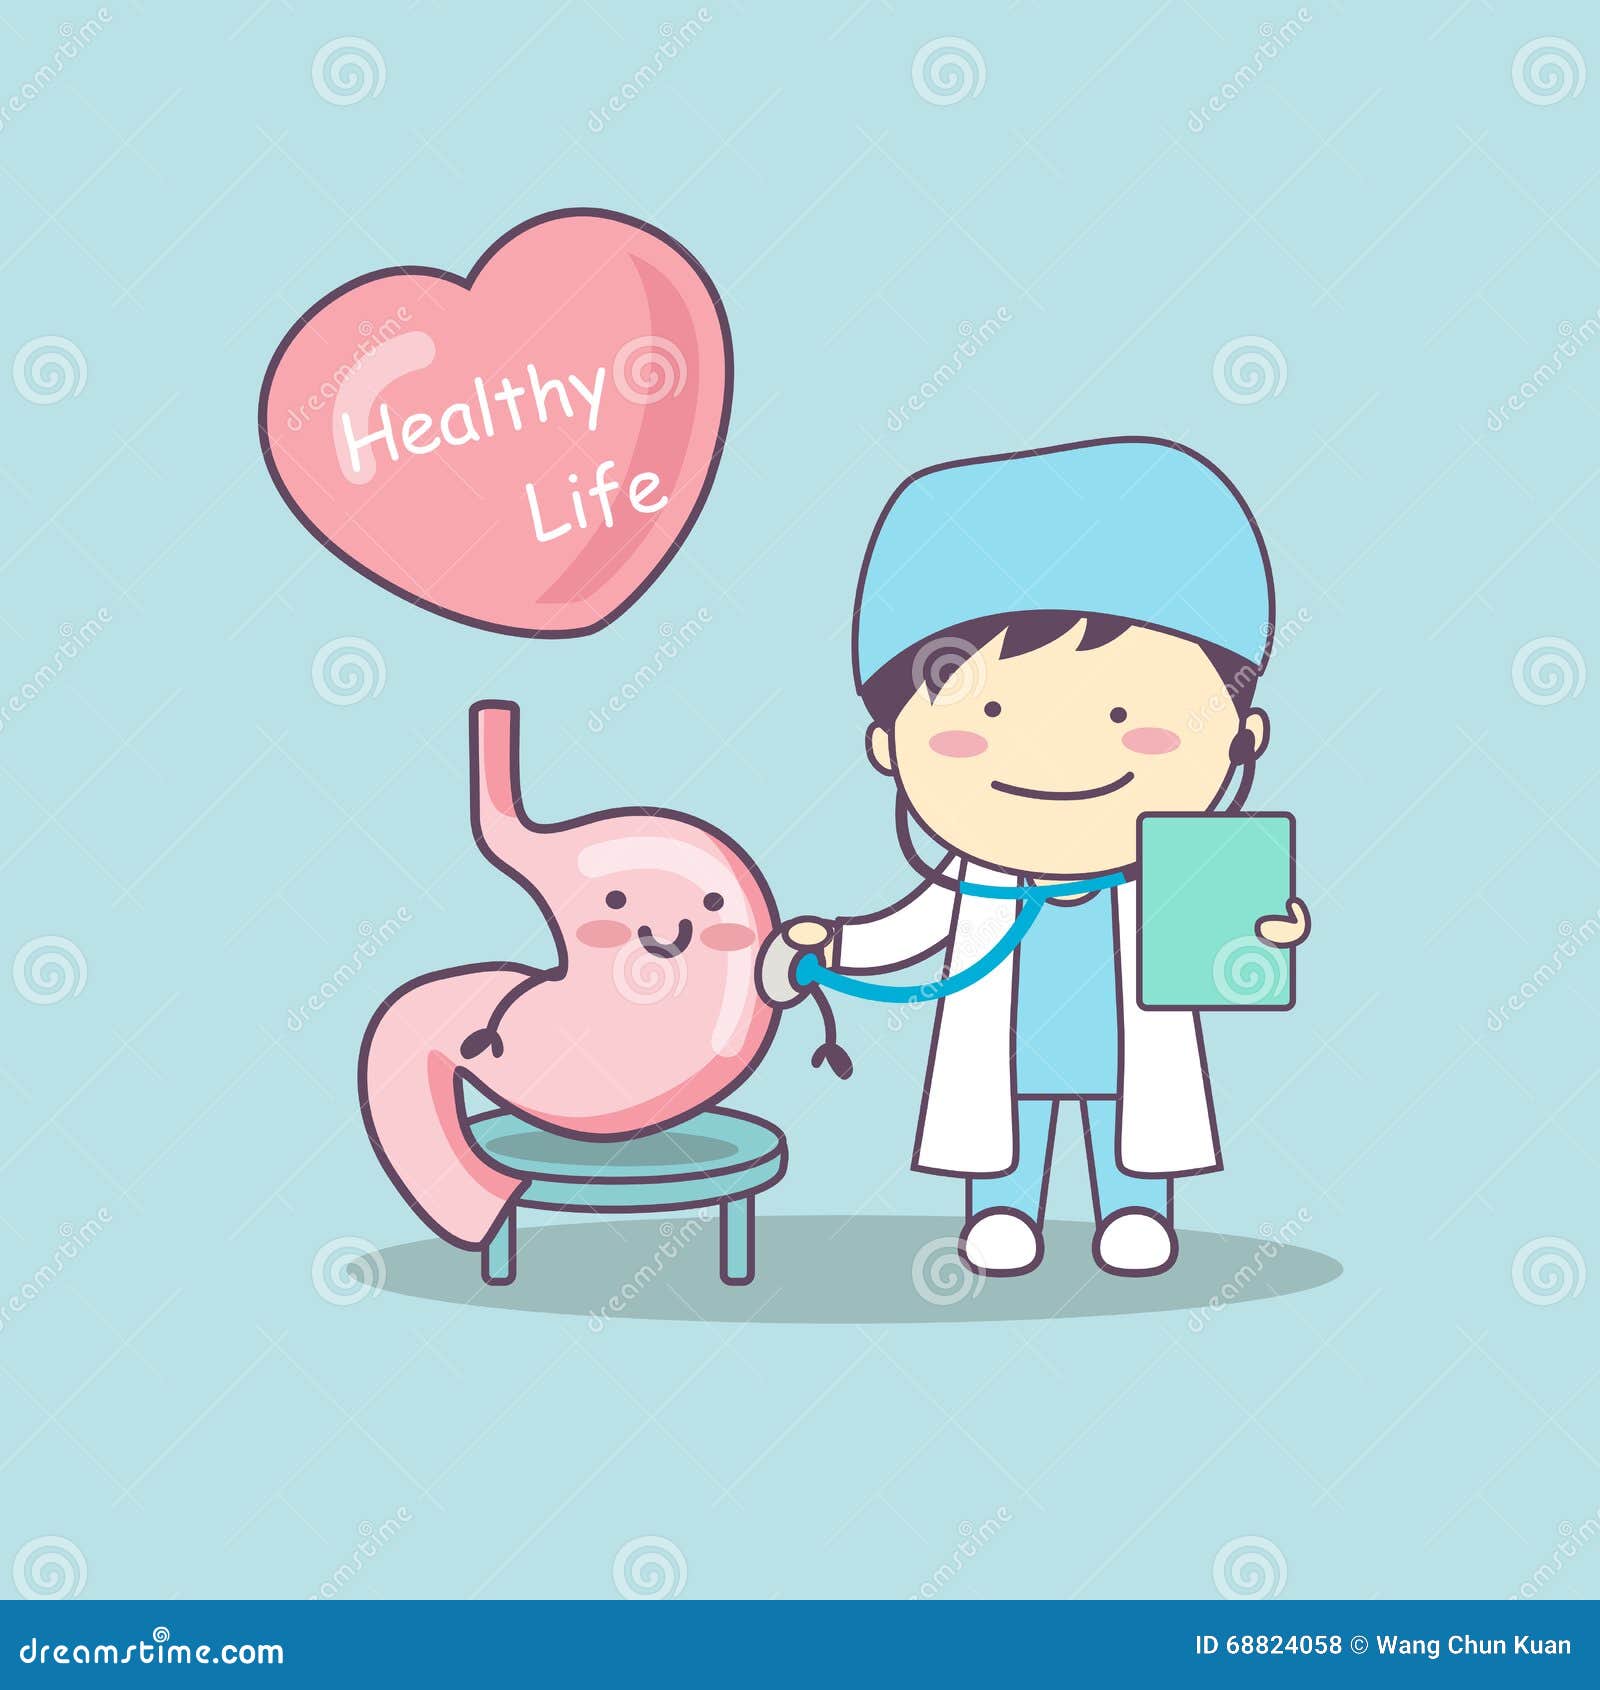 https://thumbs.dreamstime.com/z/cute-cartoon-doctor-check-stomach-great-health-life-concept-68824058.jpg